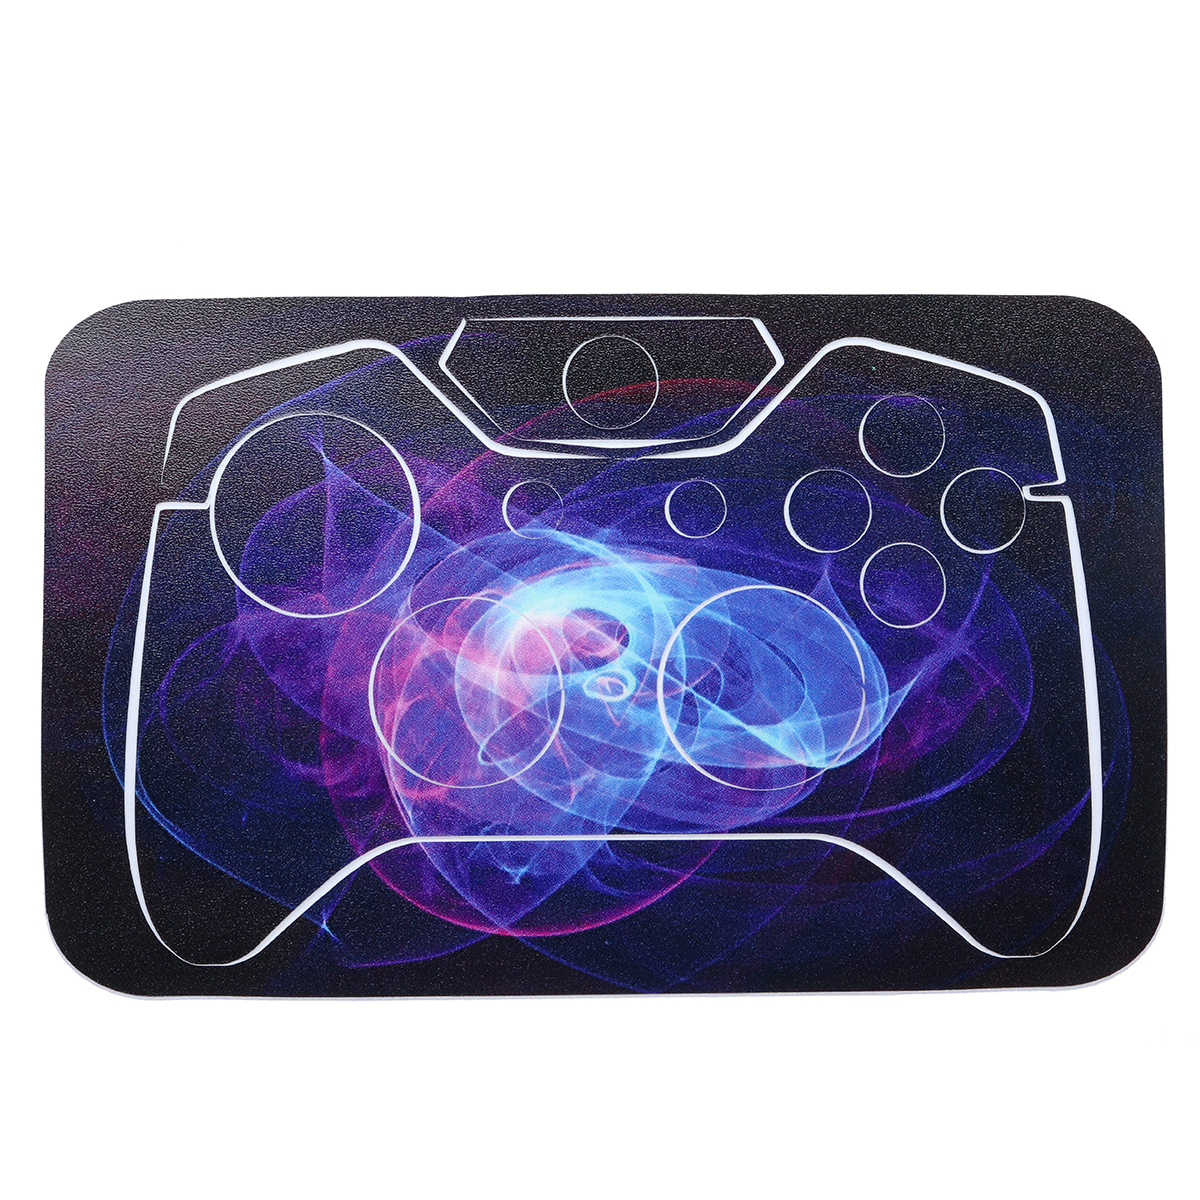 Purple Protective Vinyl Decal Skin Stickers Wrap Cover For Xbox One Game Console Game Controller Kinect 52